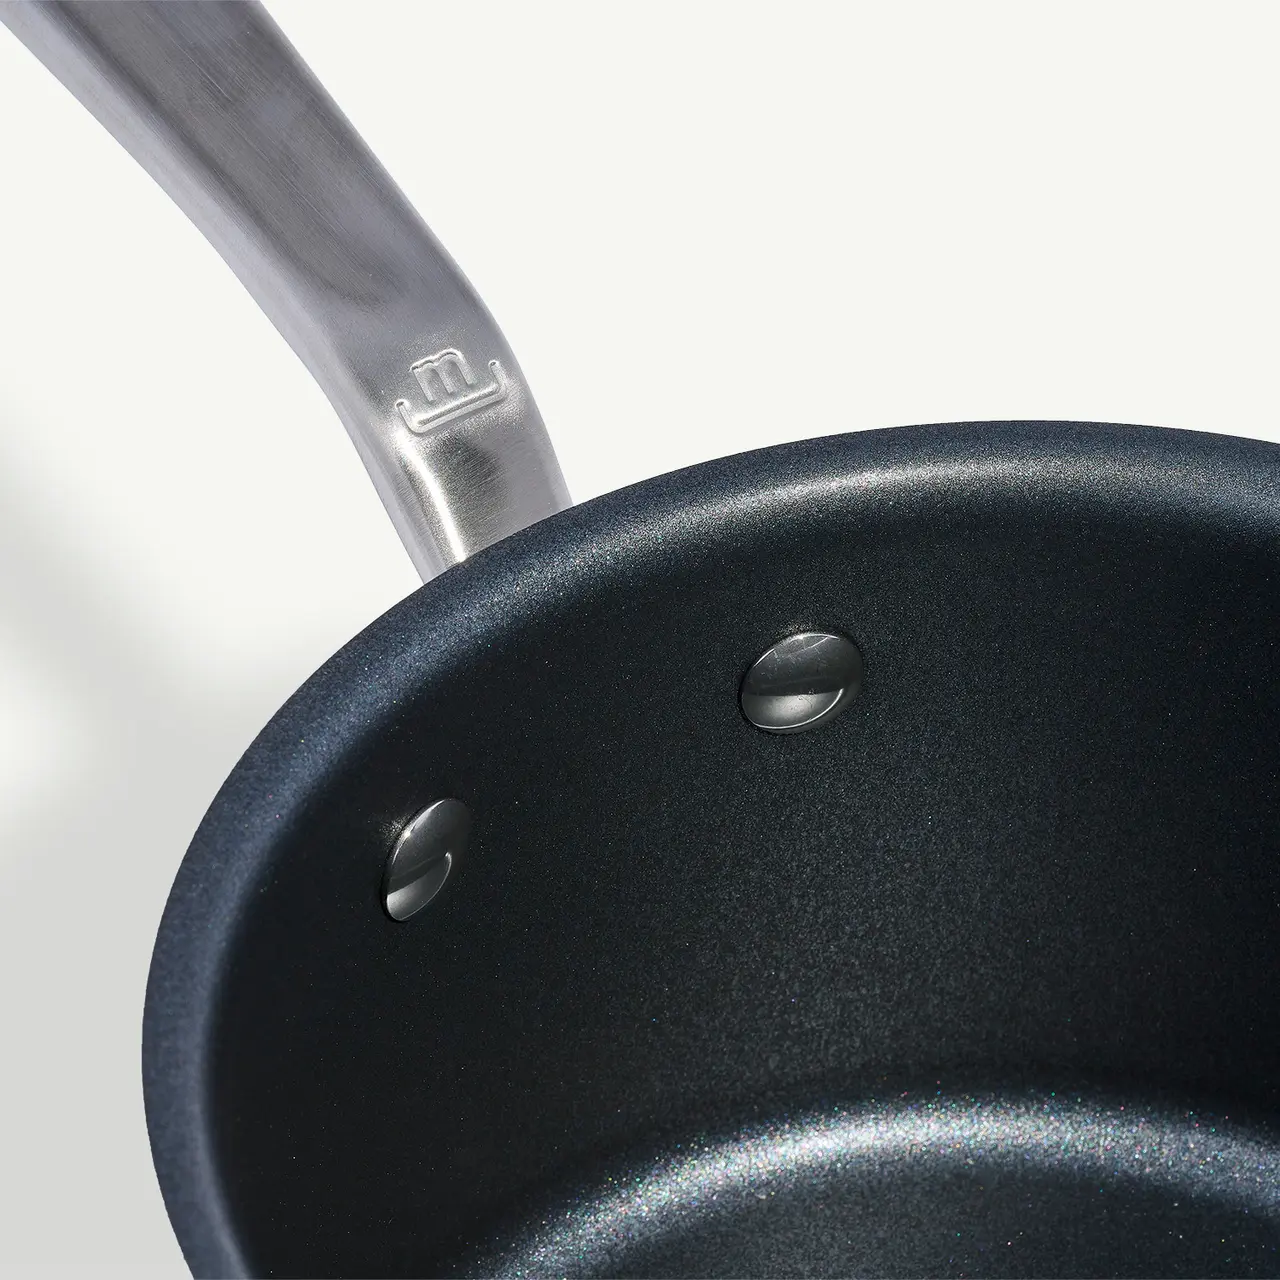 A close-up view of a non-stick frying pan with two water droplets inside and a visible section of its handle.